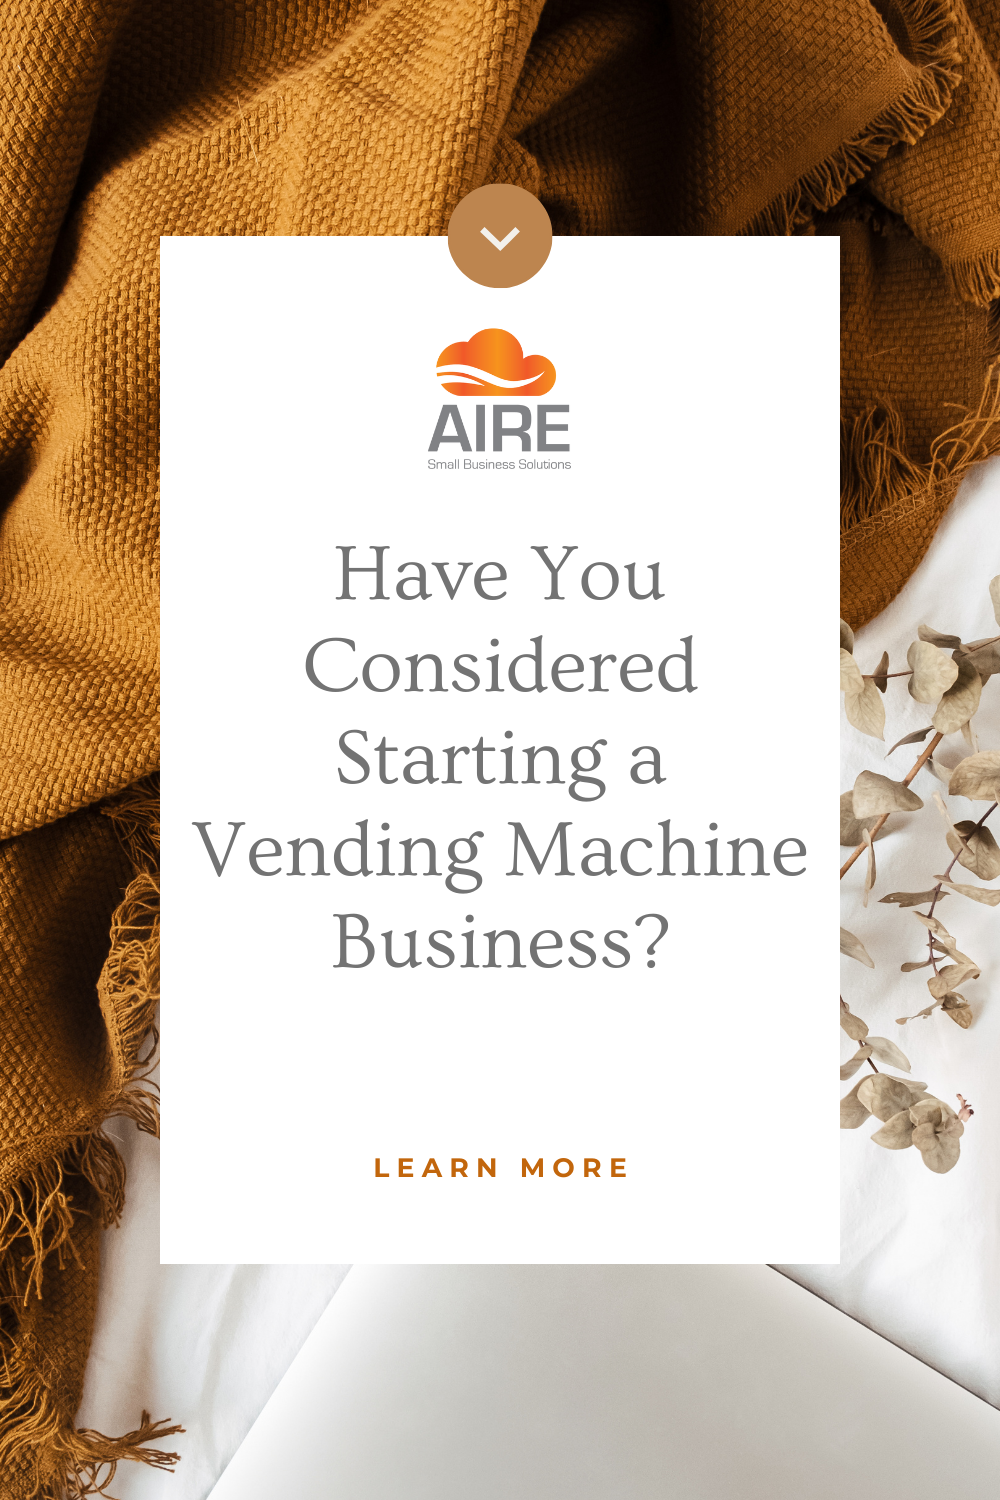 Have you considered starting a vending machine business